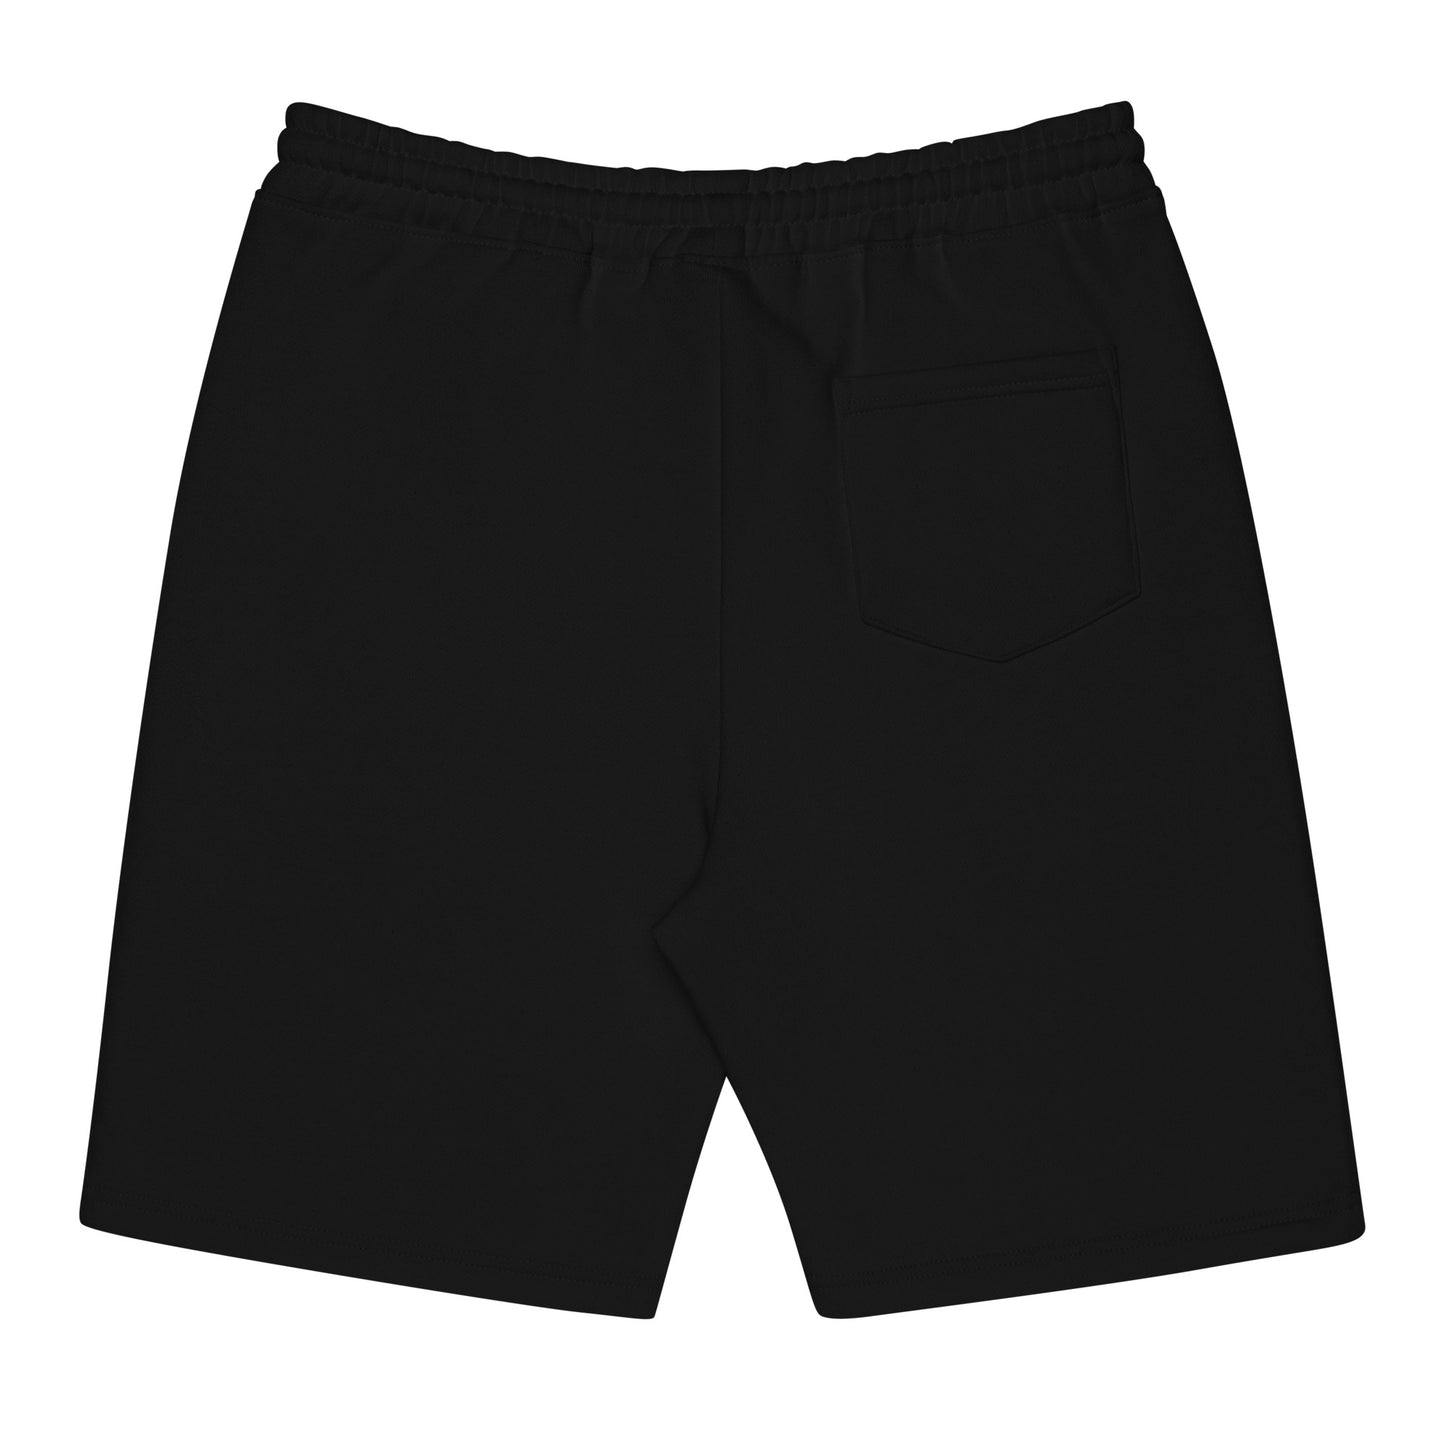 AFRICA IS THE FUTURE Fleece Shorts